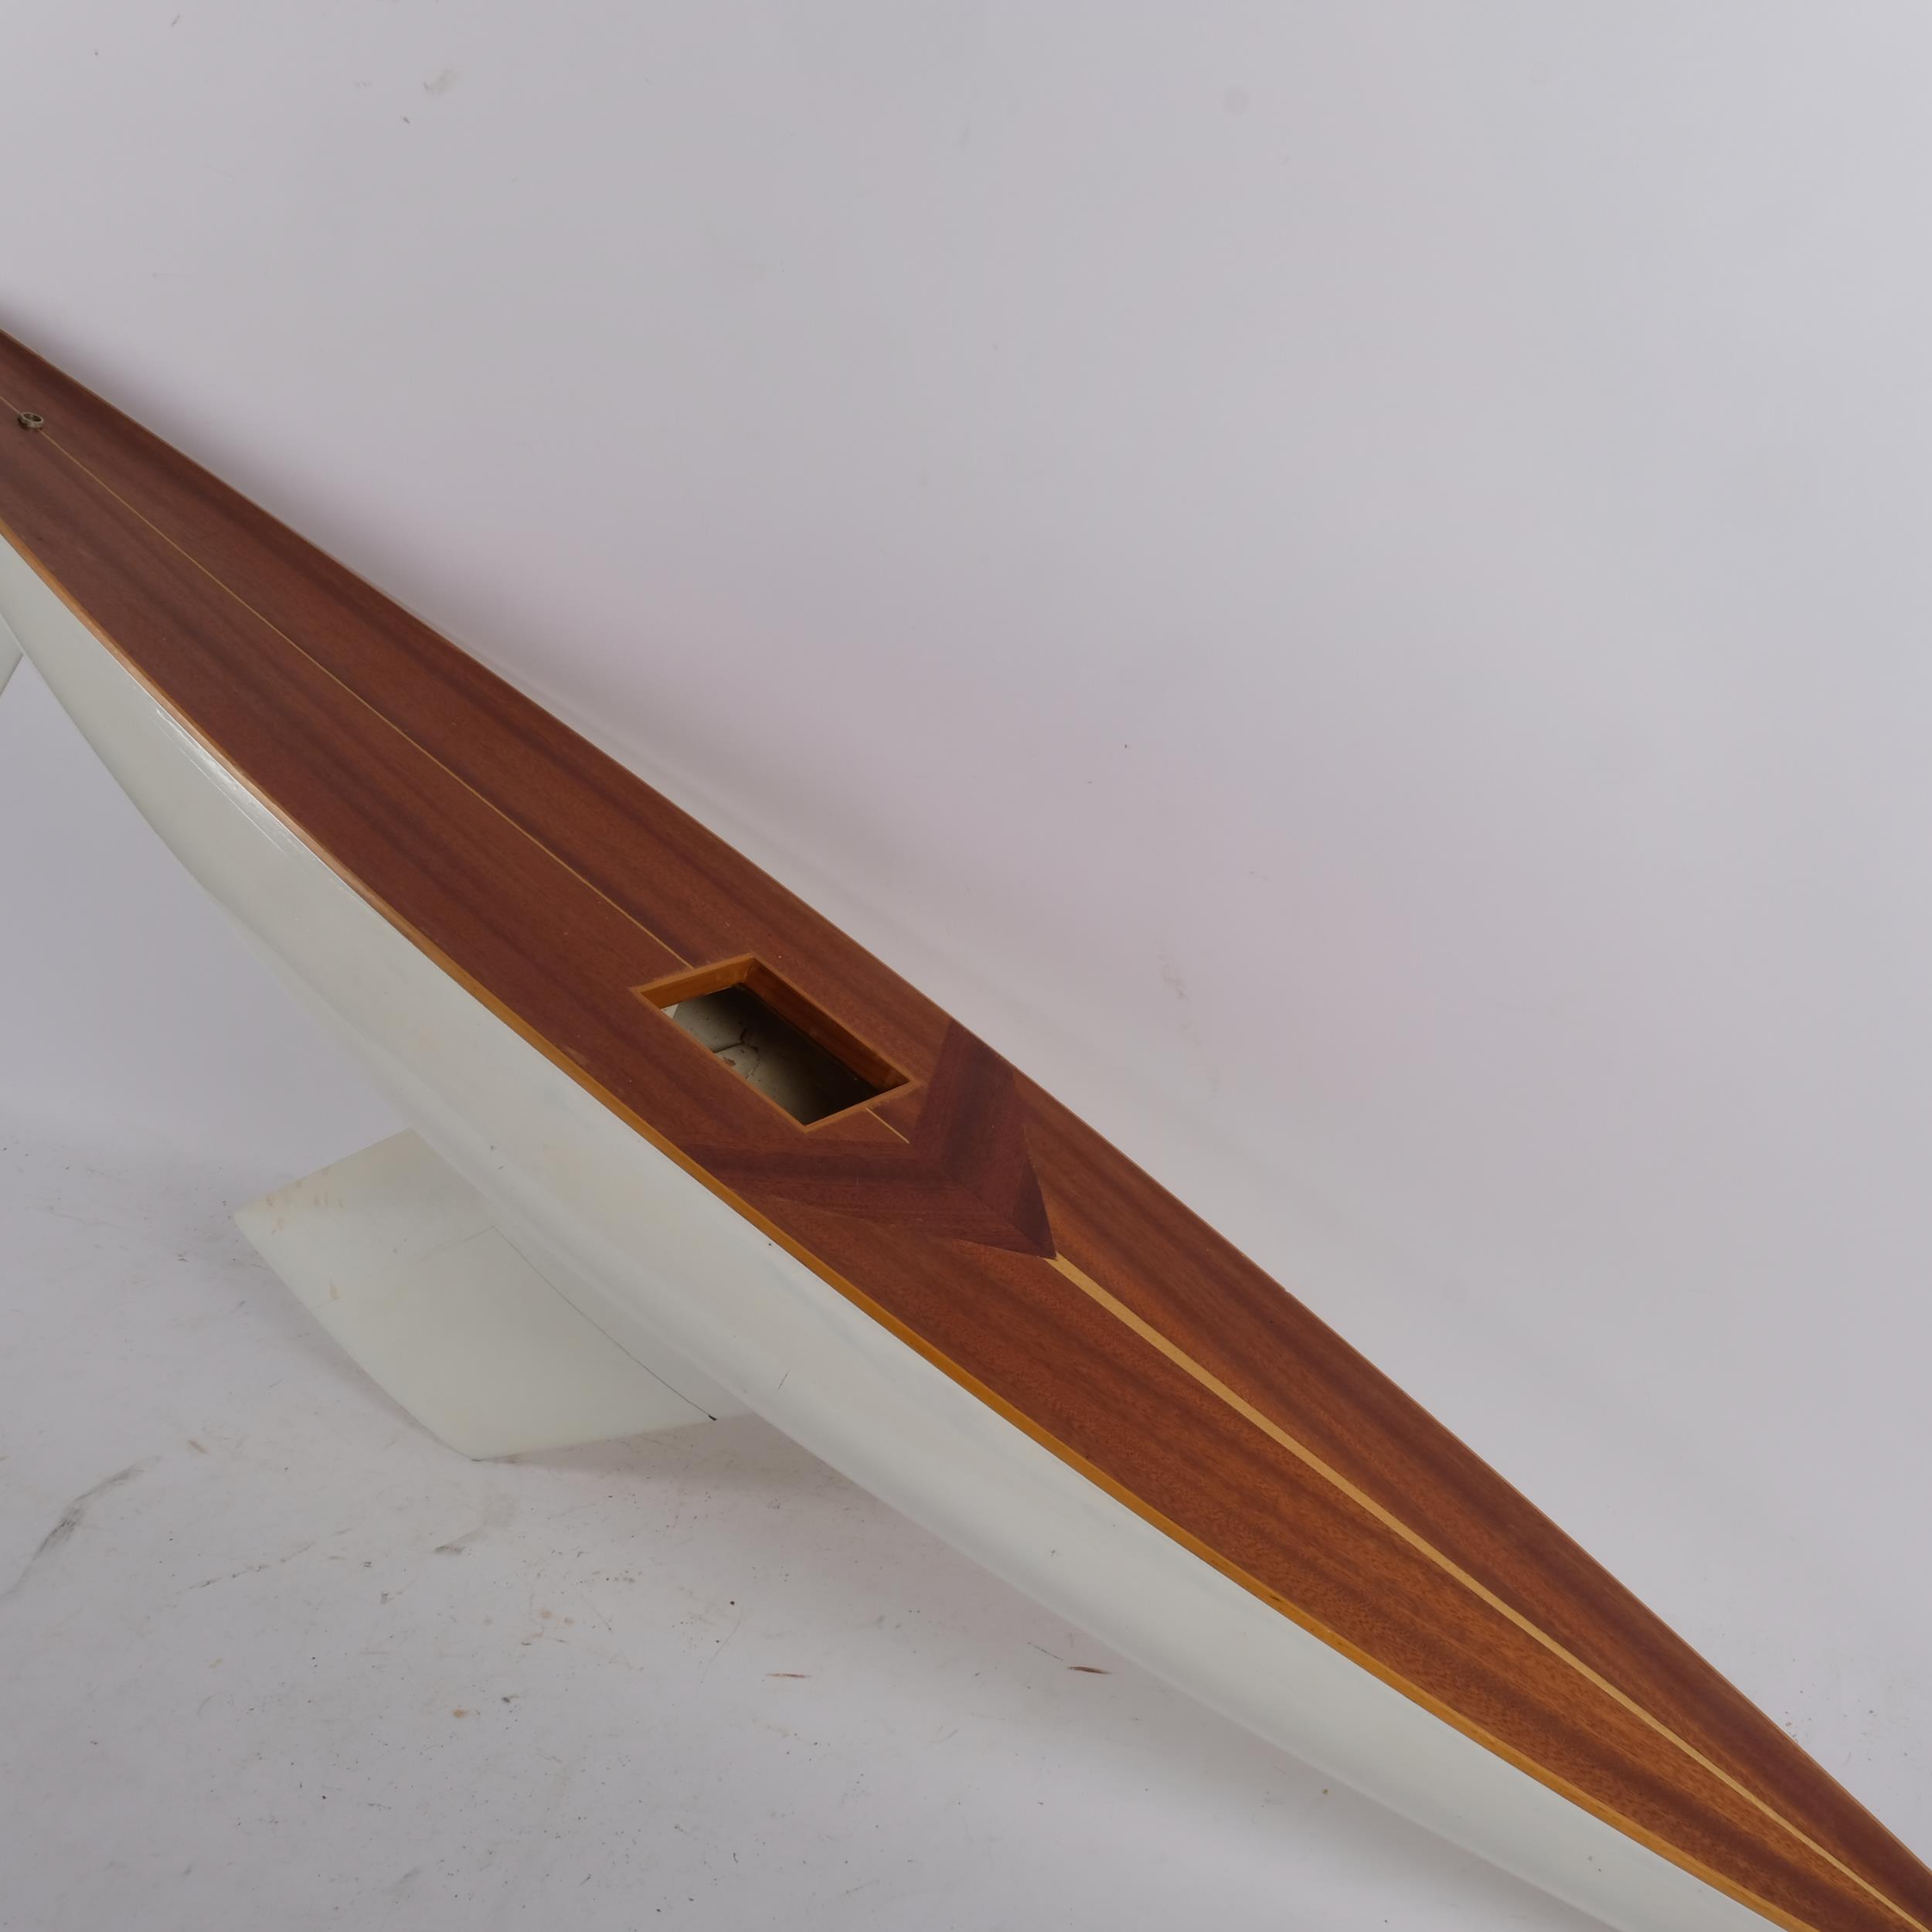 A painted and varnished wood pond yacht hull, 115cm - Image 2 of 2